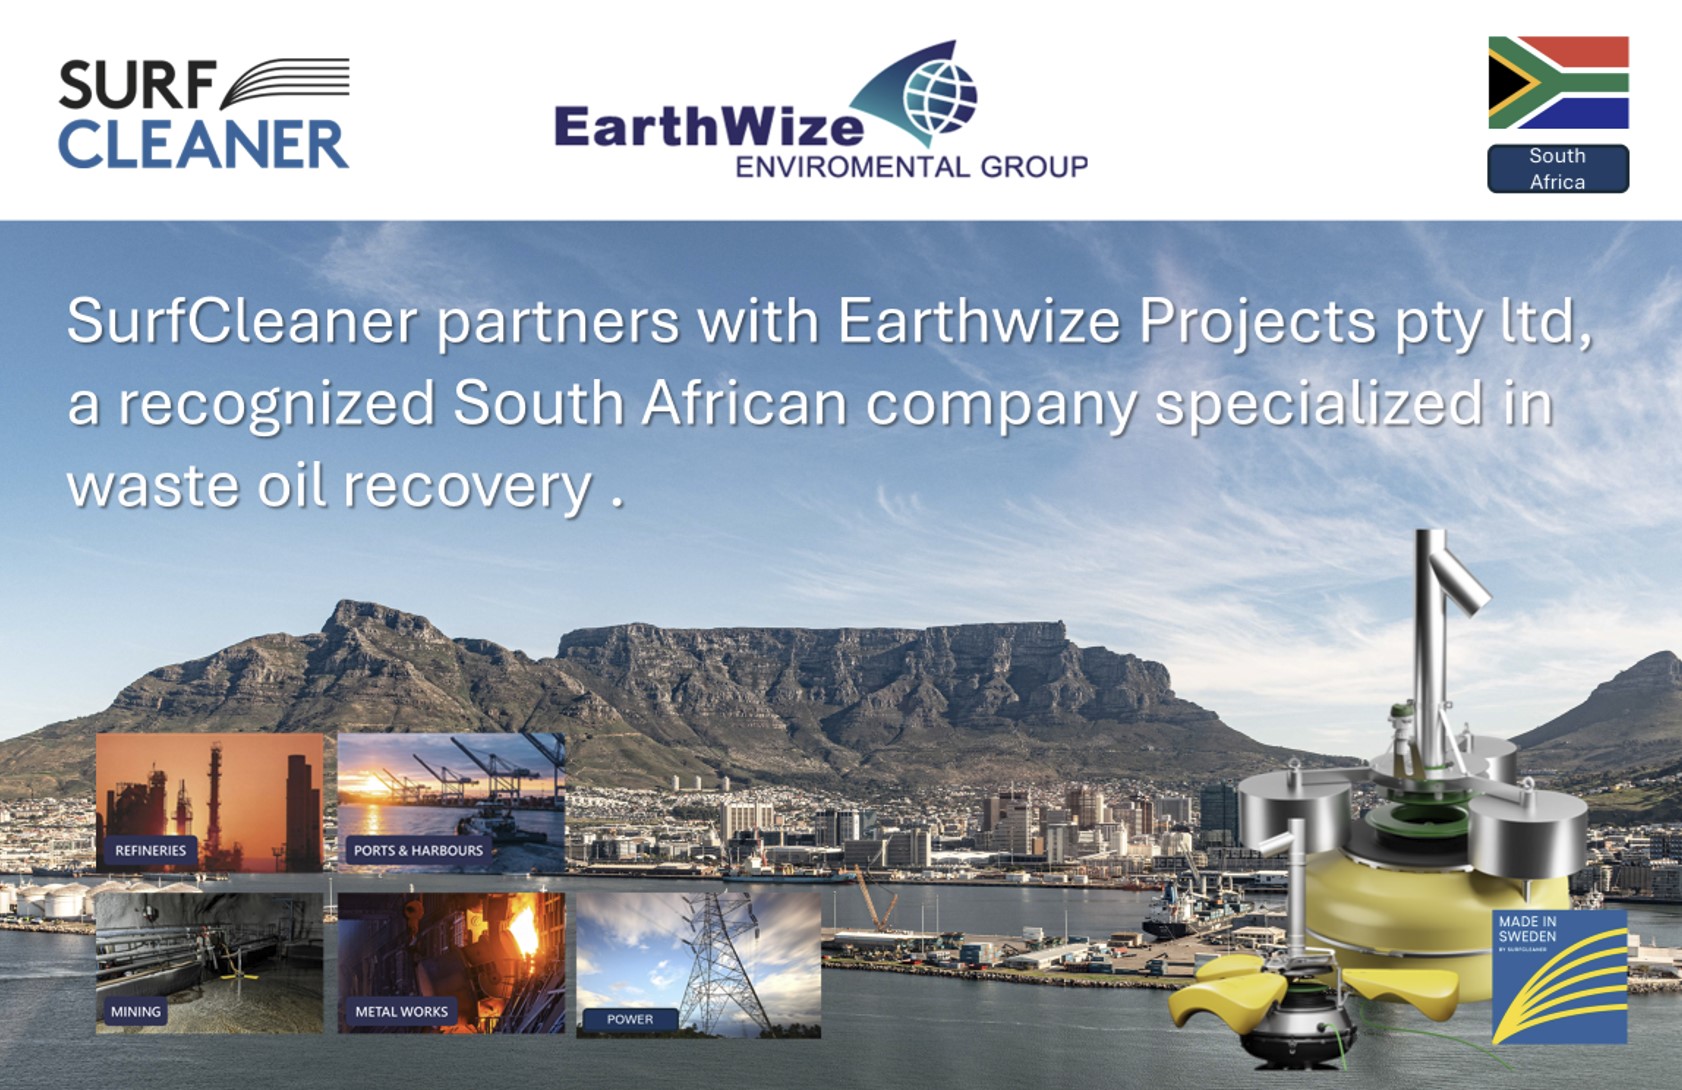 Earthwize Environmental Group joins SurfCleaner as a distributor in South Africa